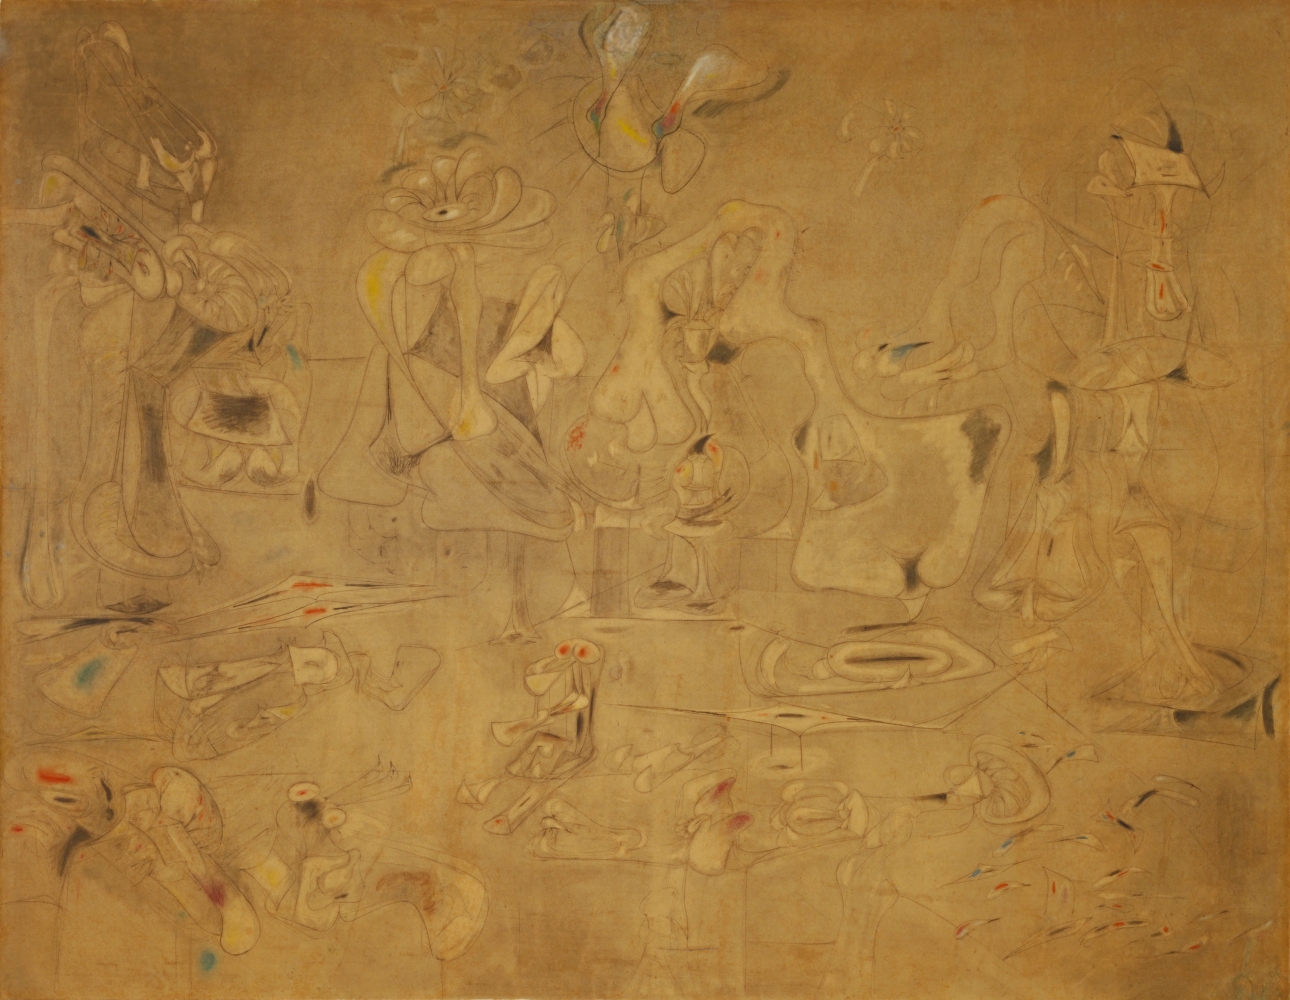 Summation, 1947,&nbsp;charcoal, graphite pencil, and pastel on paper mounted on board, 79 5/8 x 101 3/4 in. (202.2 x 258.4 cm). The Museum of Modern Art, New York. Nina and Gordon Bunshaft Fund, 234.1969. Digital Image &copy; The Museum of Modern Art/Licensed by SCALA / Art Resource, NY.&nbsp;[AGCR: D1486]